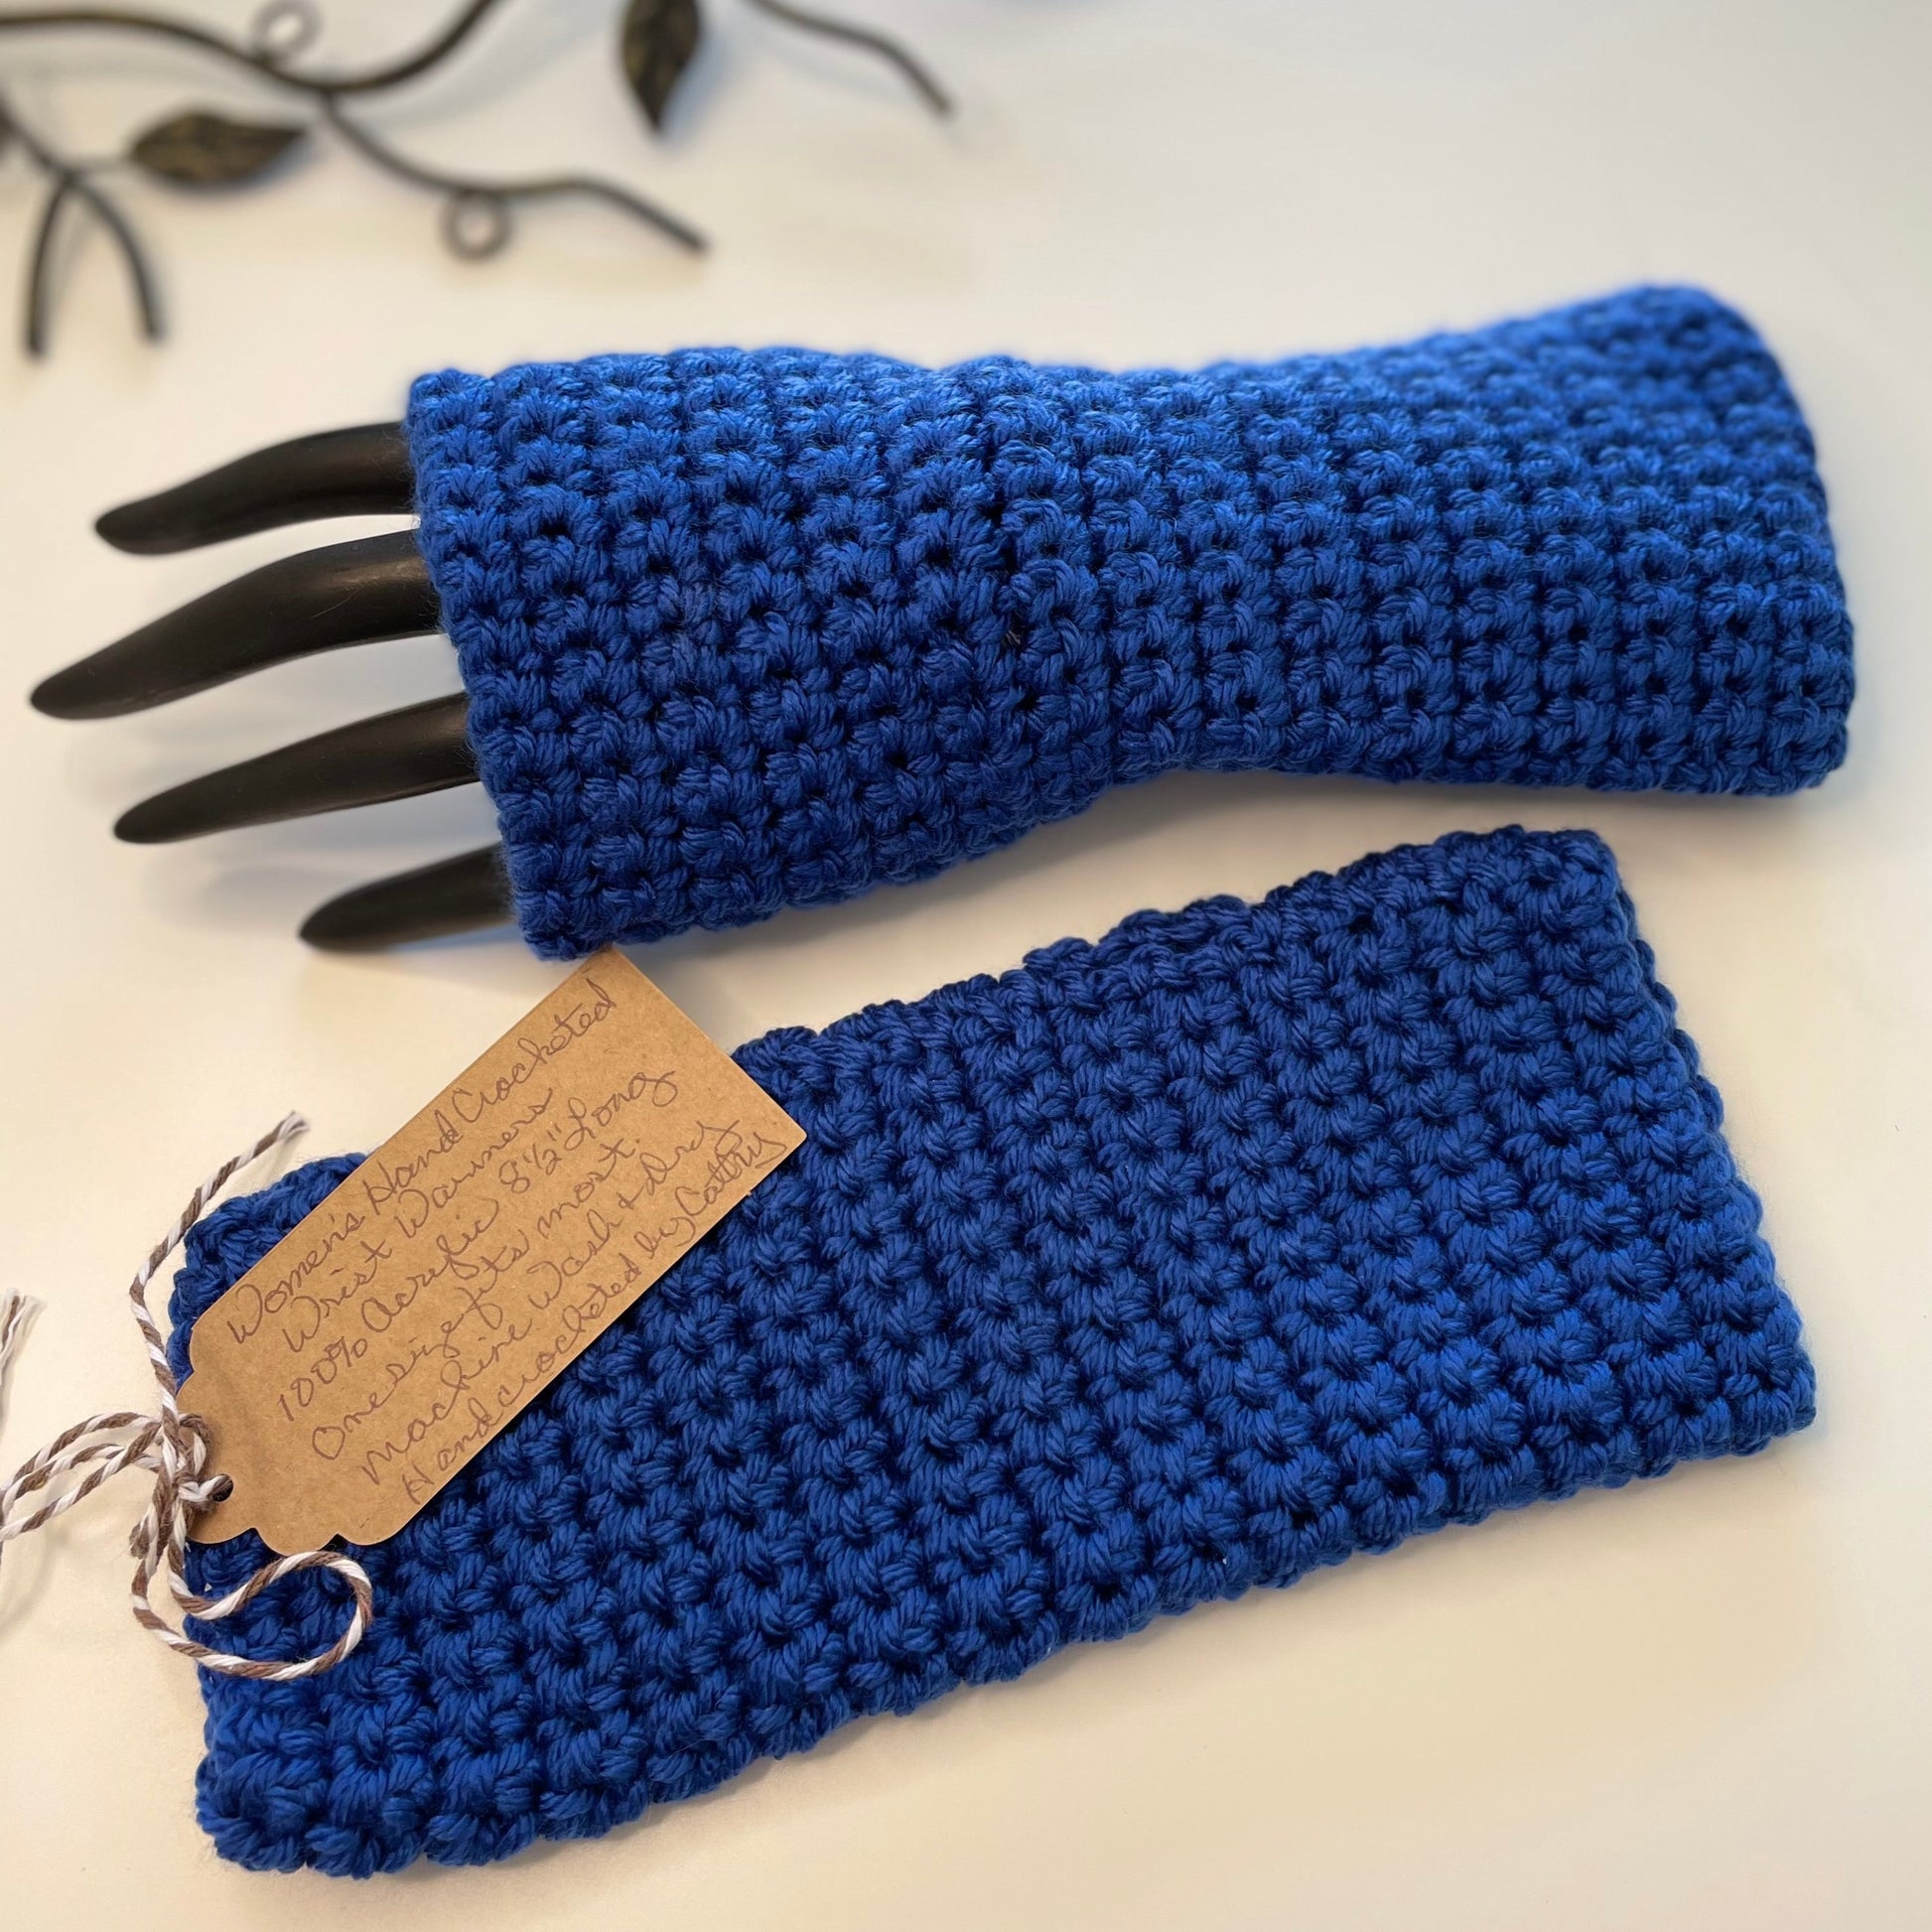 Extra Soft Cobalt Blue Writing Tech Fingerless Gloves Crochet Knit Gaming Texting Wrist Warmers against white background